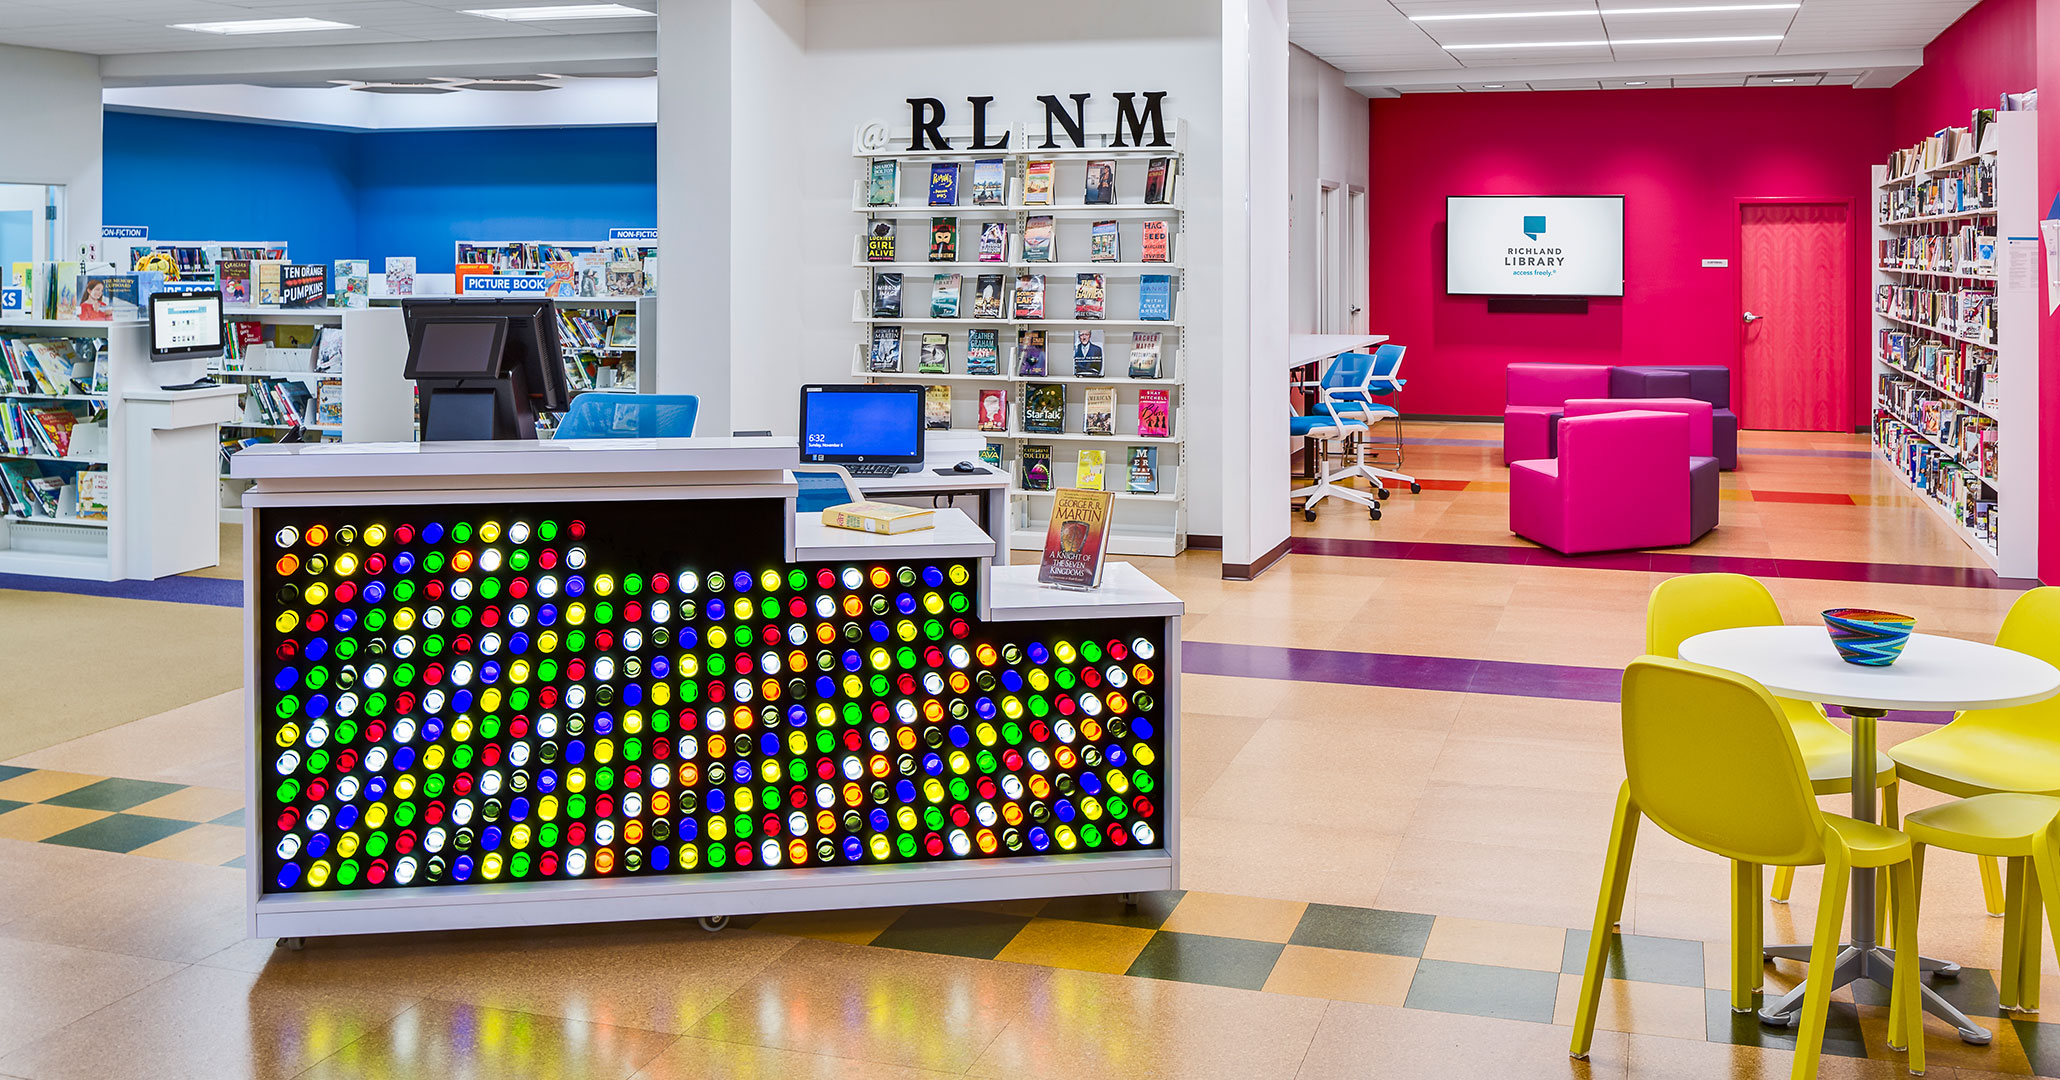 Richland County Library hired Boudreaux to design the interiors at North Main Library location in Columbia, SC.